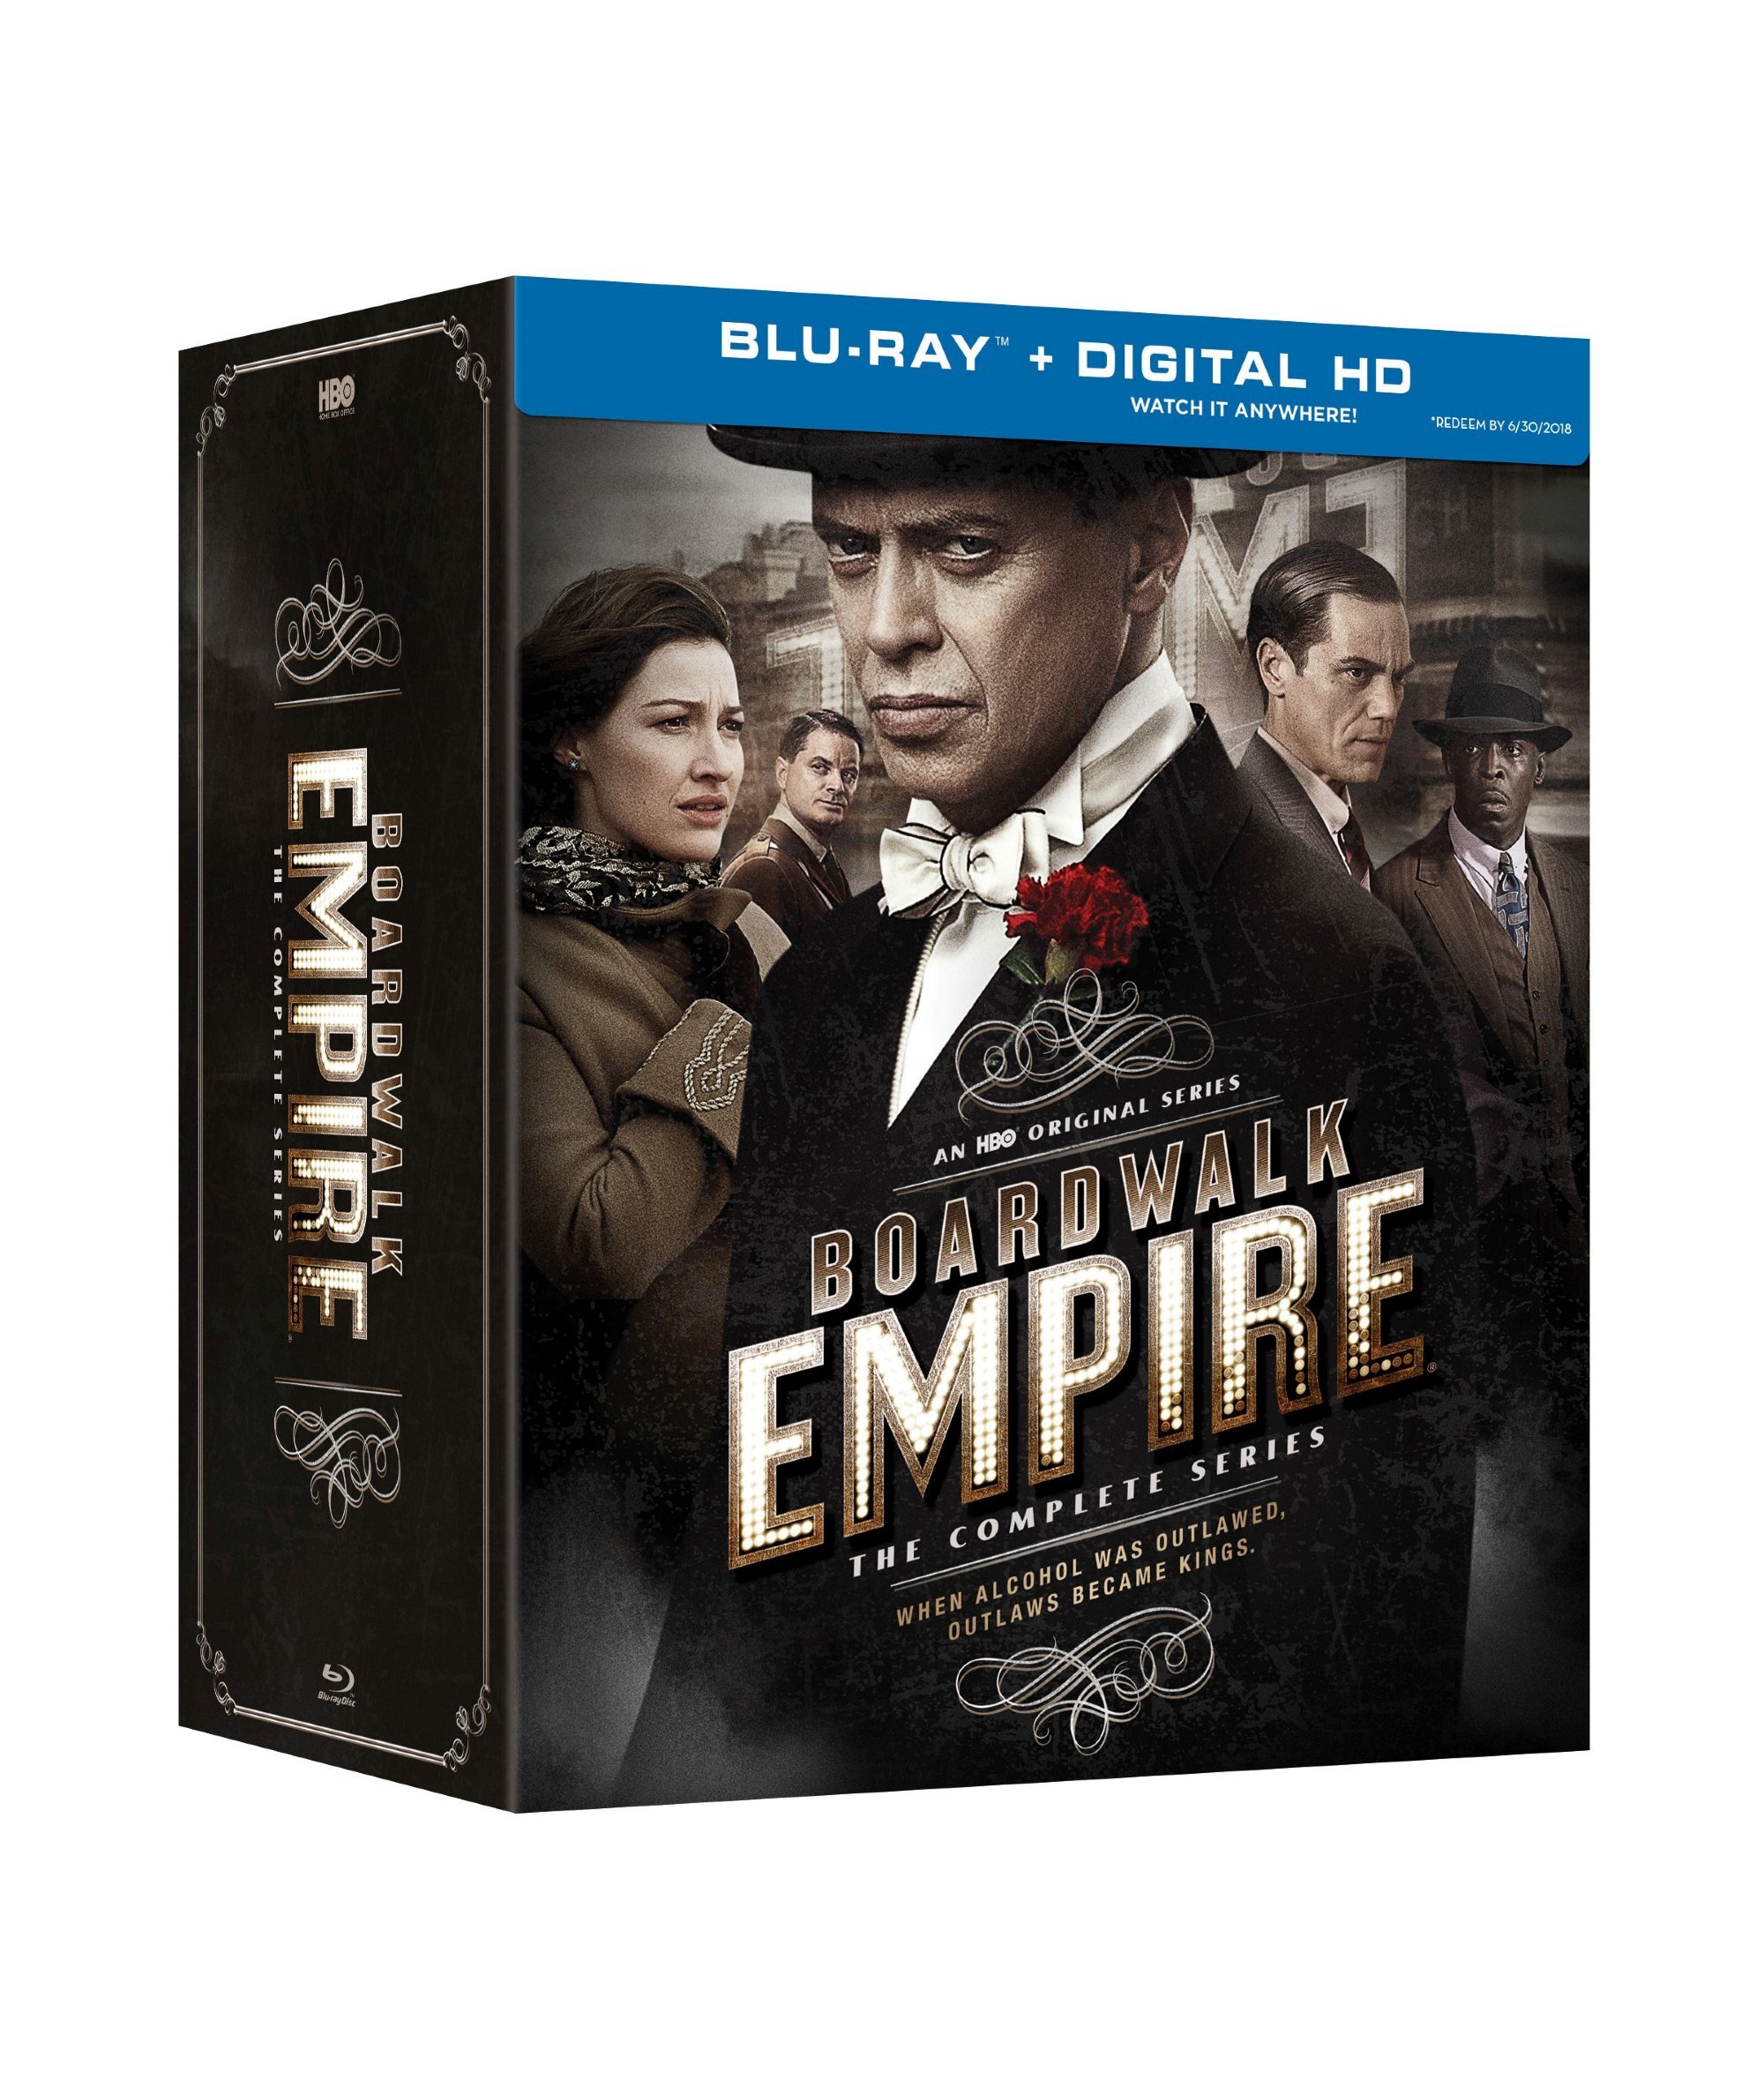 Boardwalk Empire: The Complete Series (Box Set) - Blu-ray [ 2013 ]  - Drama Television On Blu-ray - TV Shows On GRUV